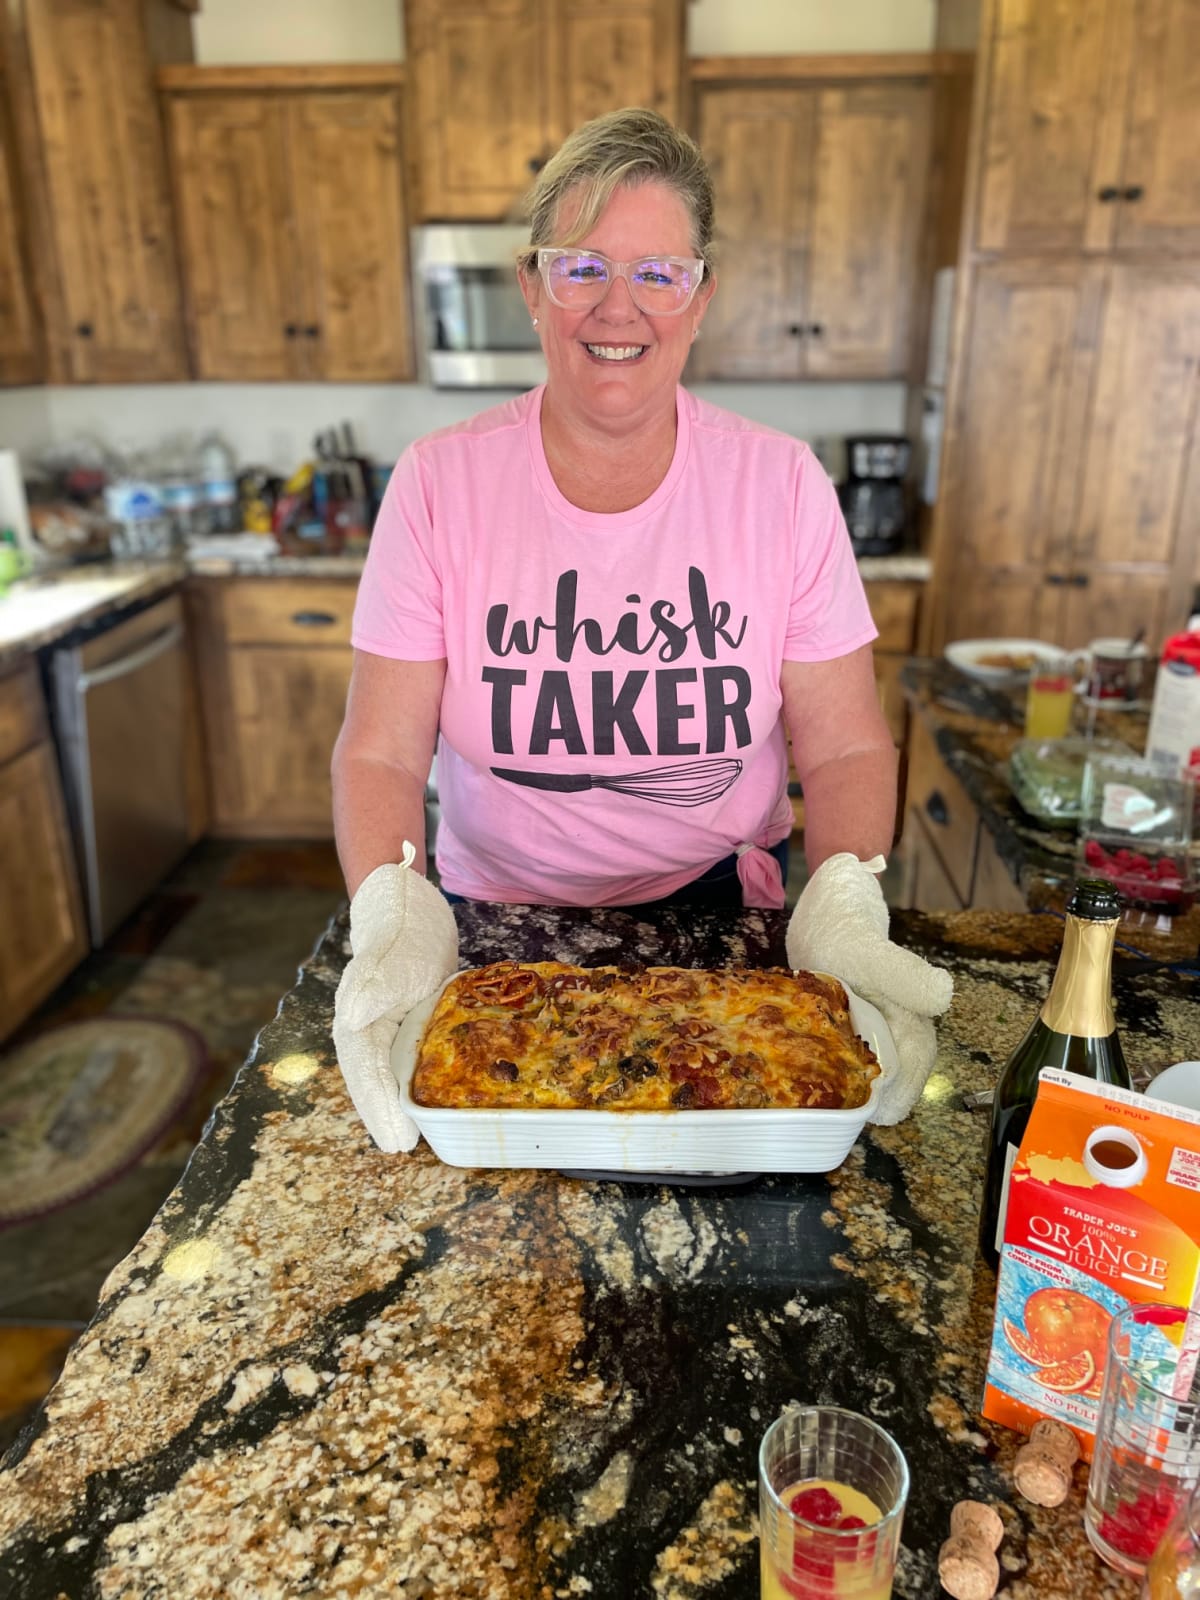 A lady in a kitchen holding a breakfast casserole with oven mitts smiling and about to serve brunch.